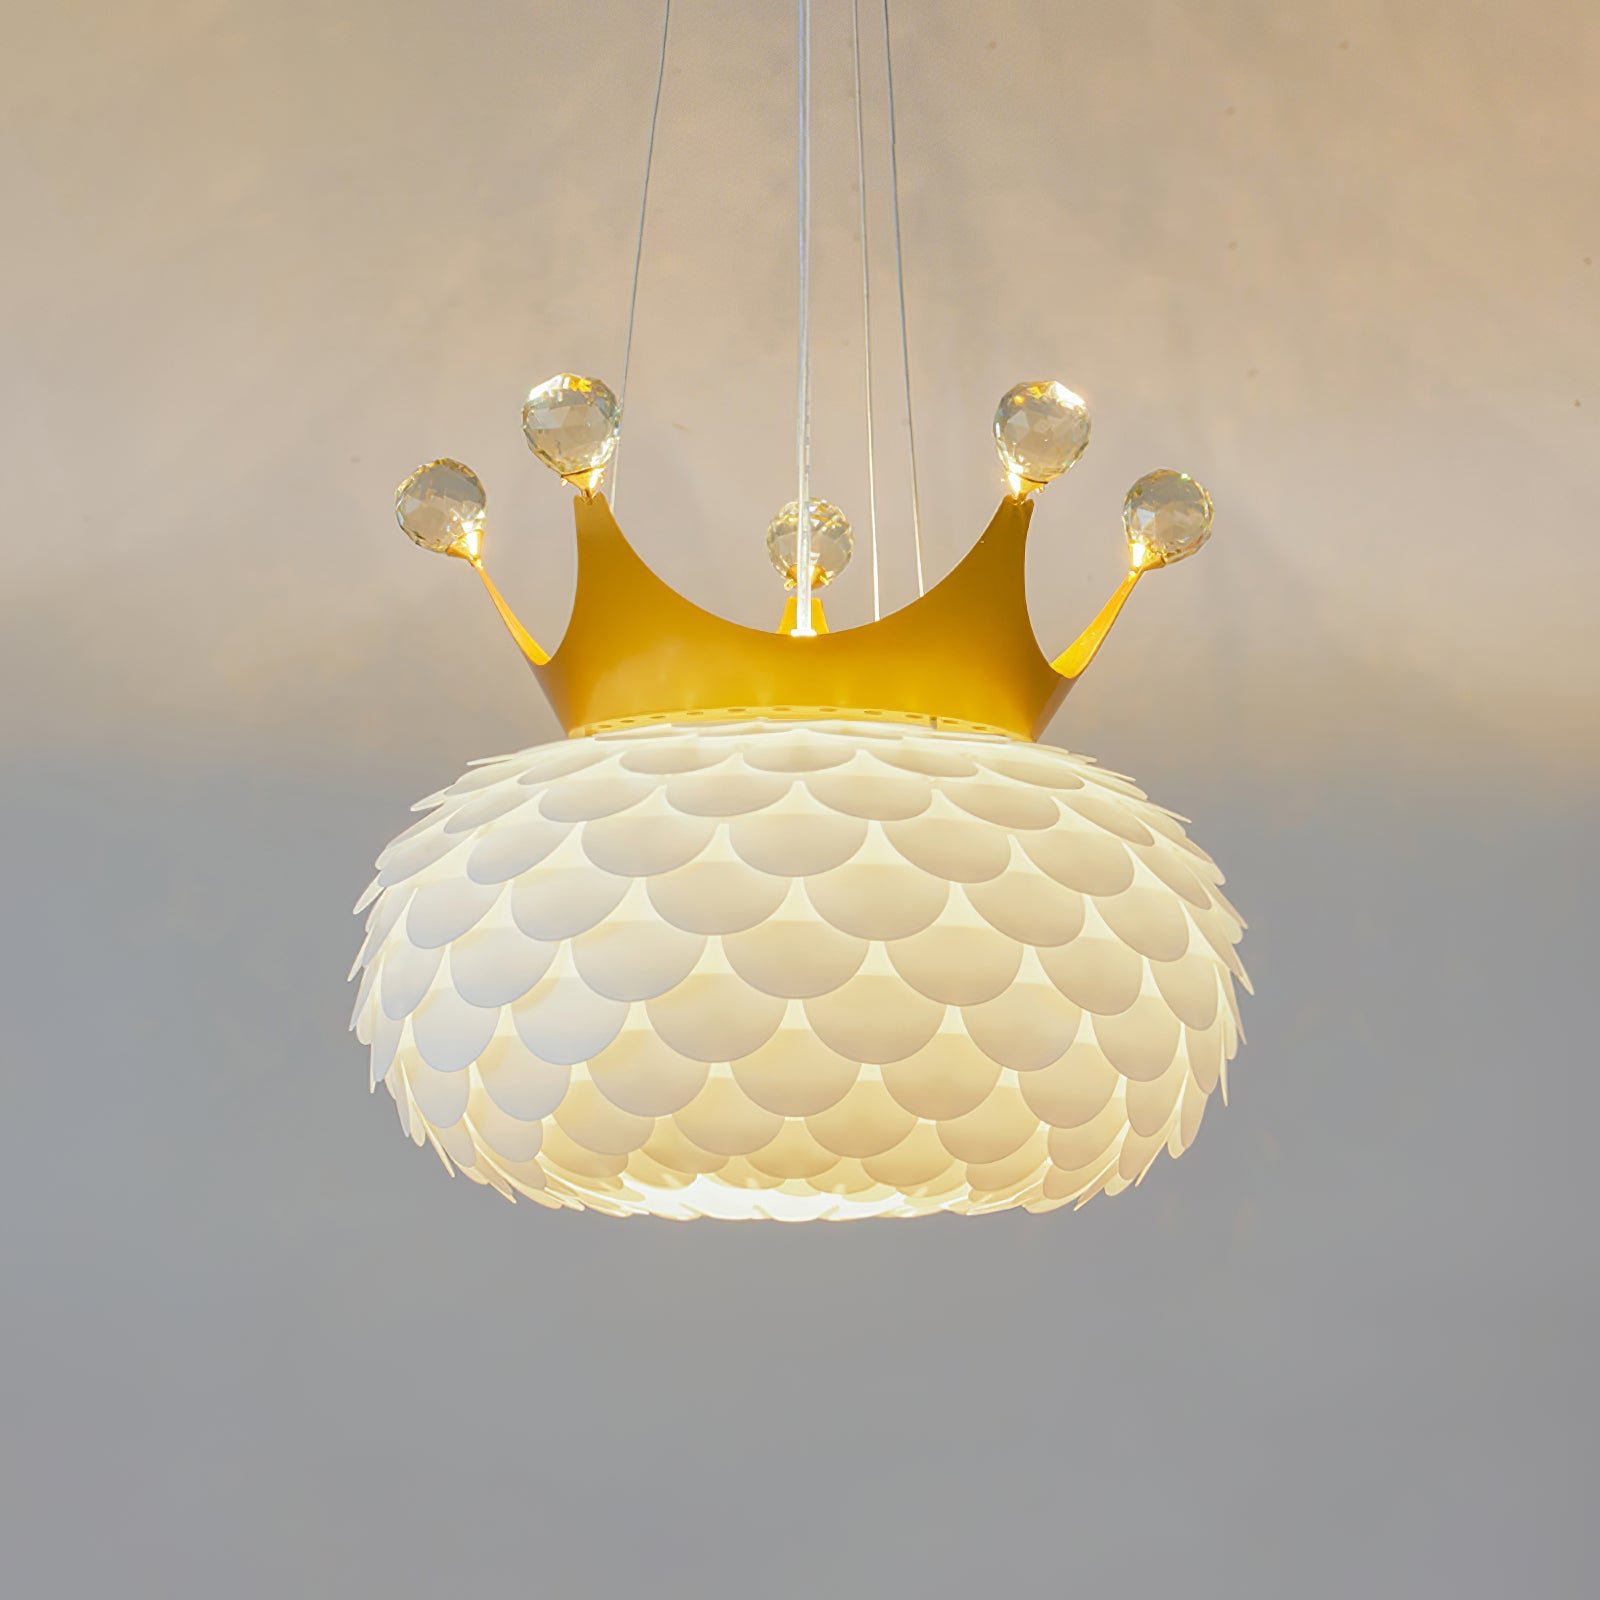 Gold Aluvia Crown Pendant Lamp, 15.7 inches in diameter and 21.2 inches in height (40cm x 54cm).